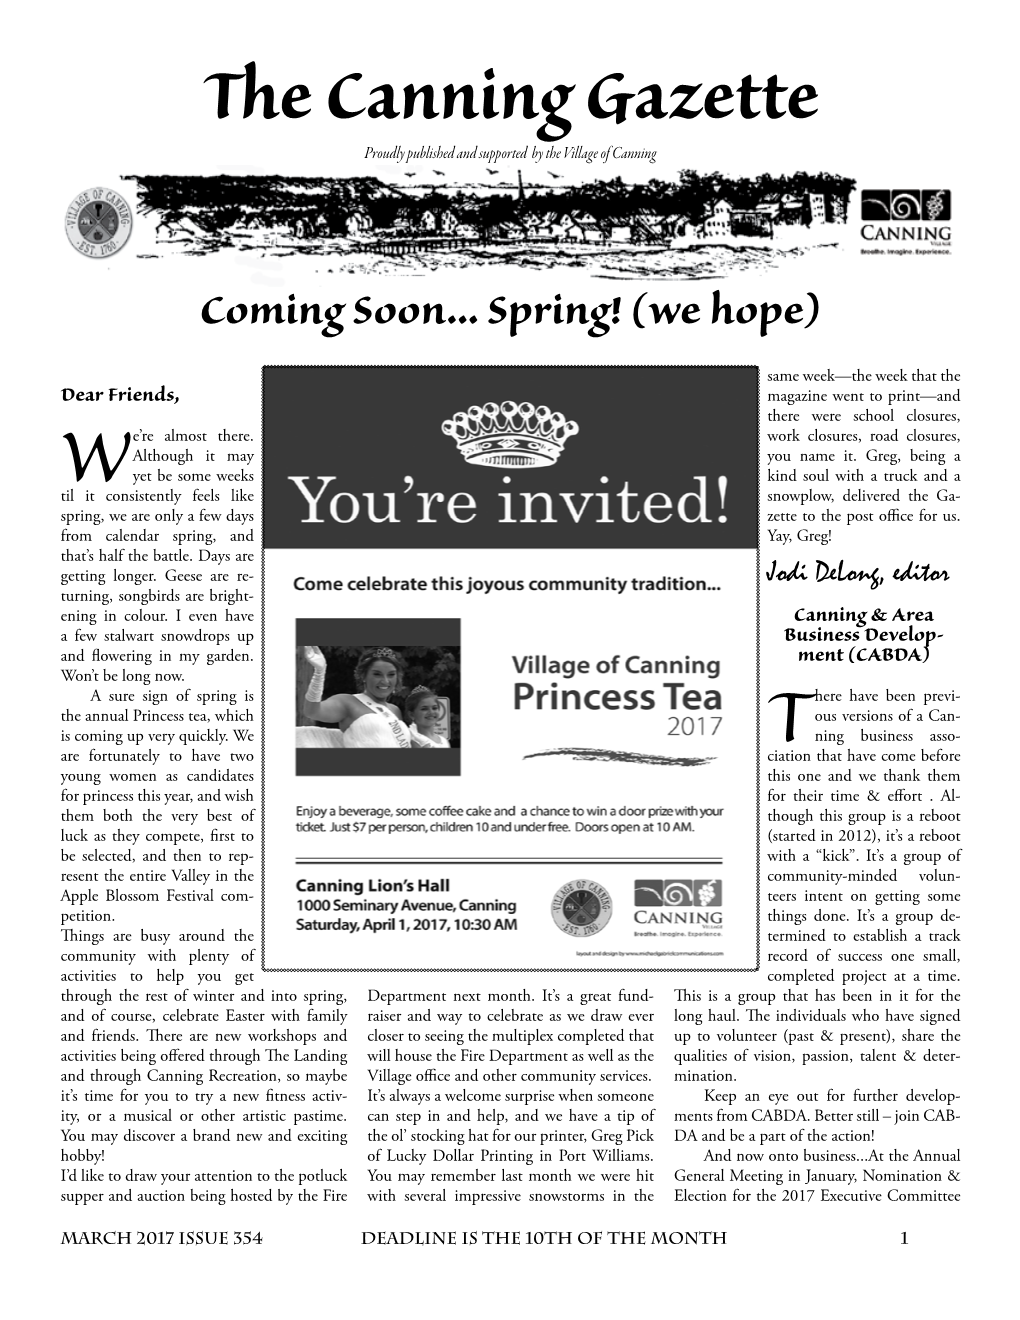 The Canning Gazette Proudly Published and Supported by the Village of Canning